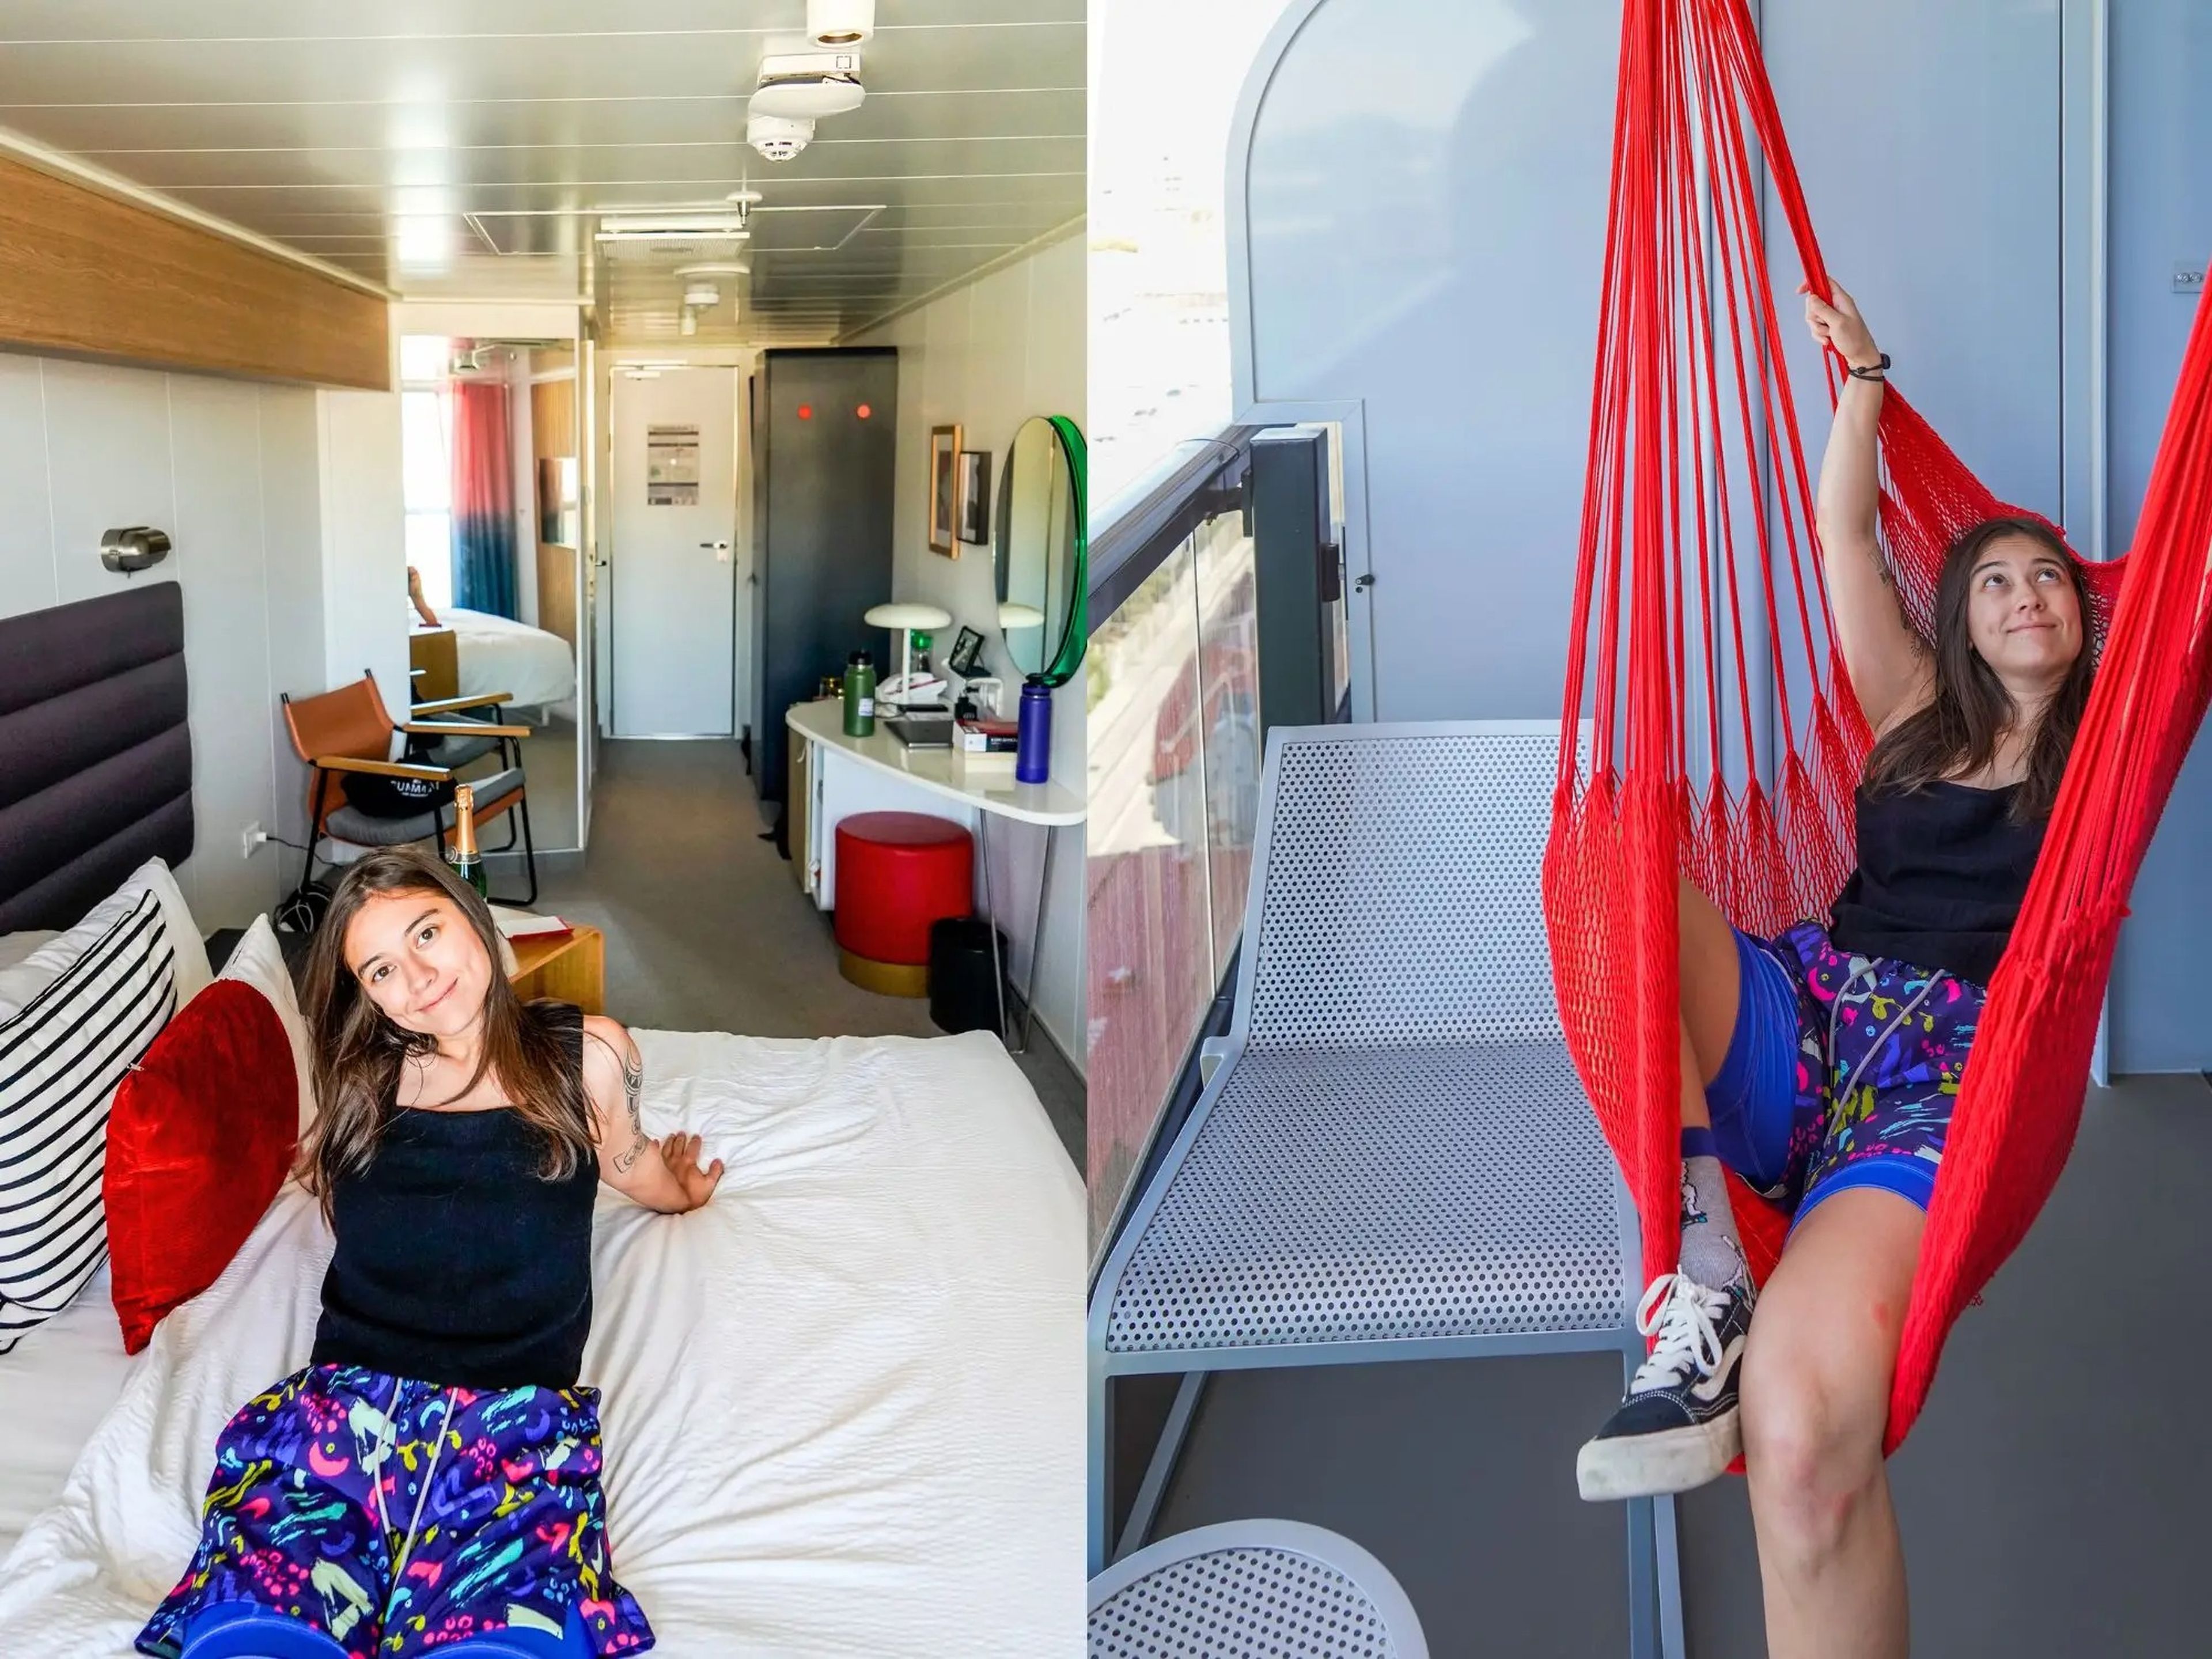 L: The author sits on a bed with white sheets and a red pillow on the left. Behind her is the cruise ship cabin R: the author in a black top and blue shorts relaxes in a red hammock